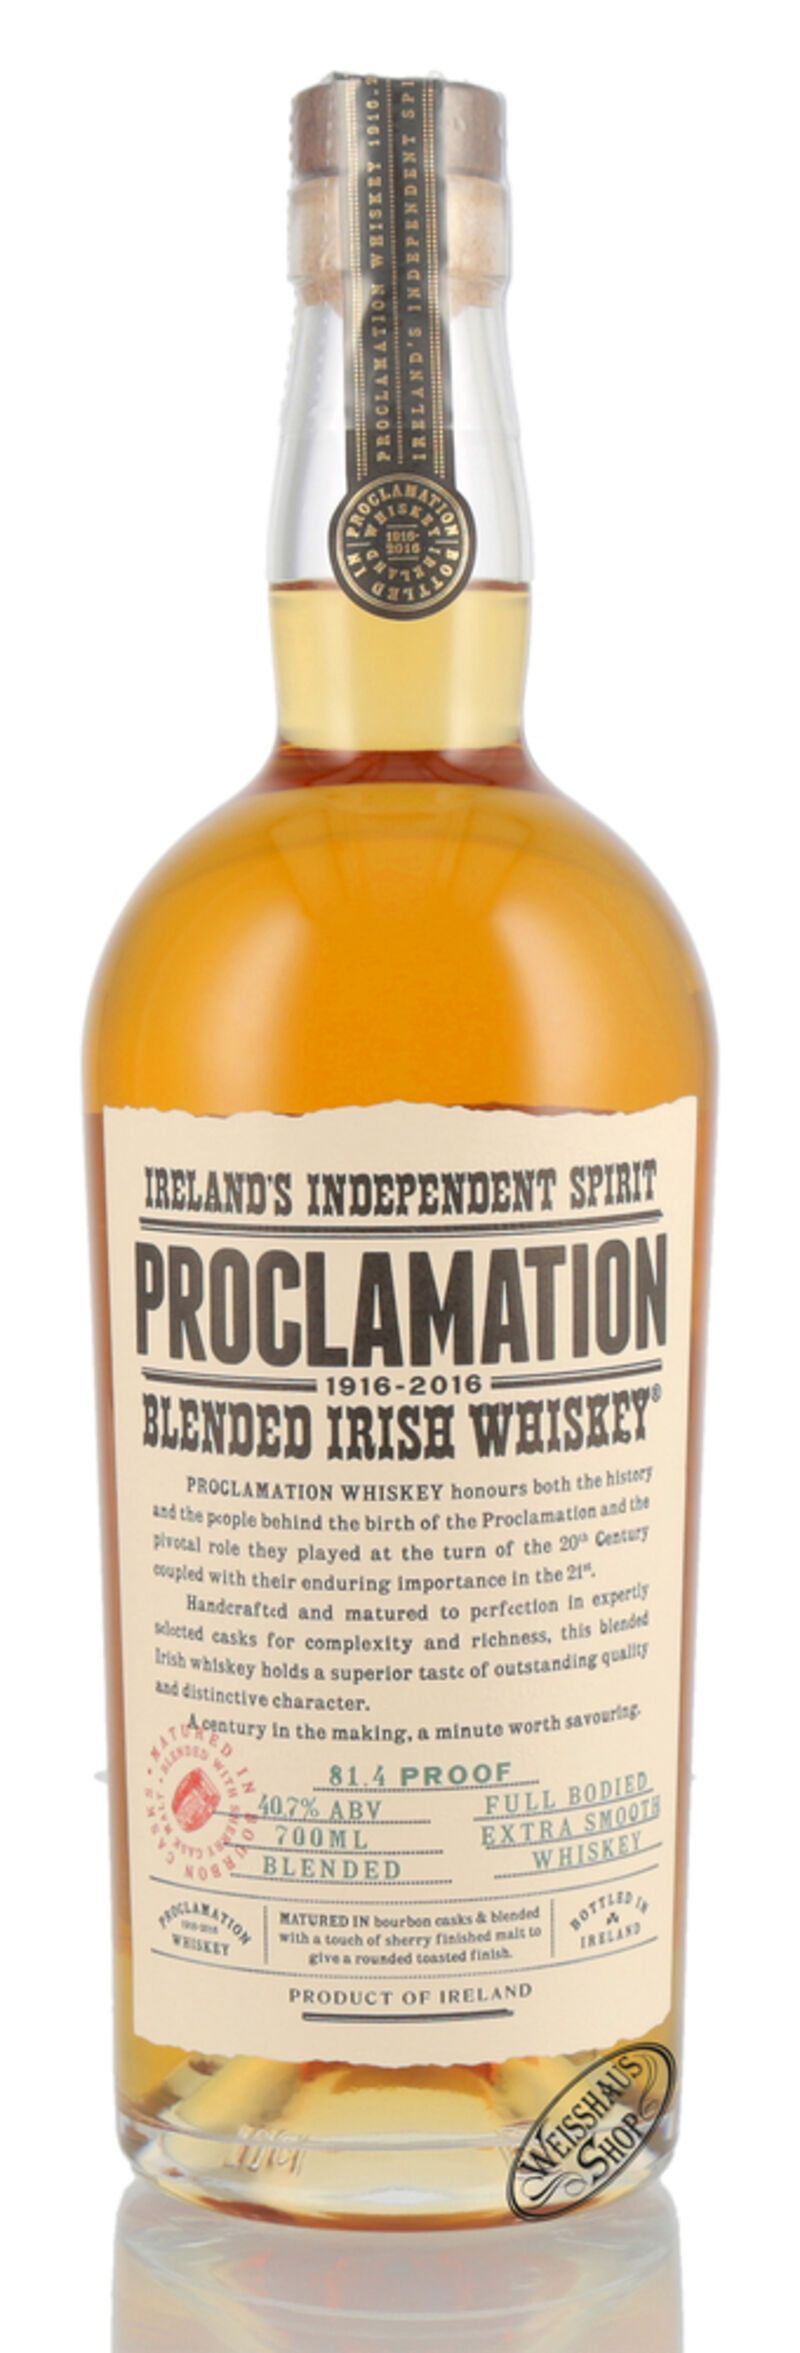 Proclamation Blended Irish Whiskey 407 Vol 070l Weisshaus Shop 4994